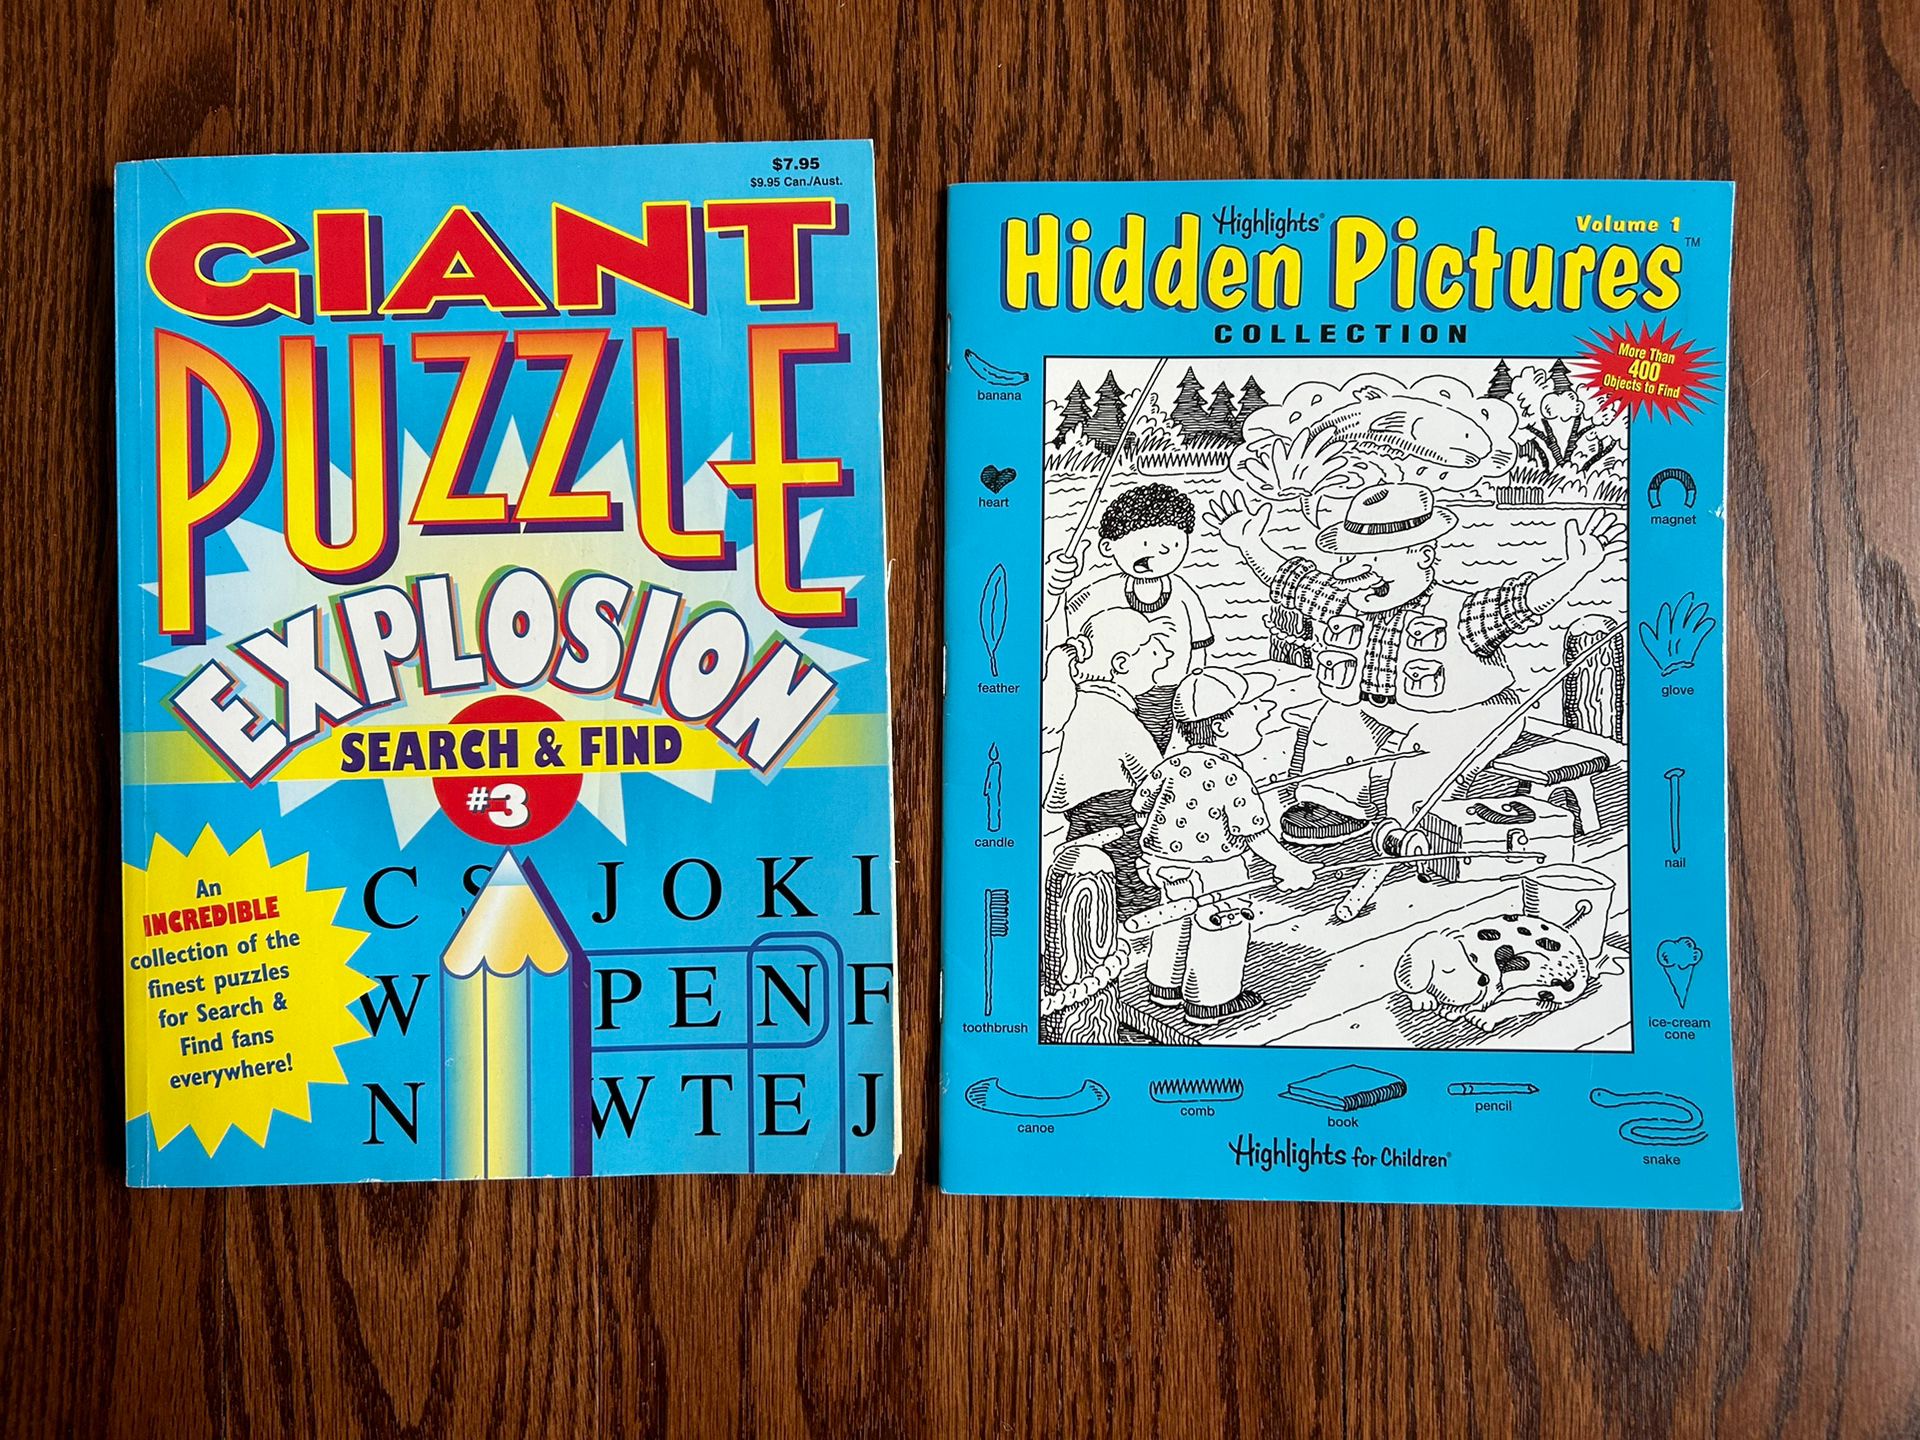 Giant Puzzle Explosion Search&Find 135 Puzzles & Highlights Hidden Pictures 400+ Objects